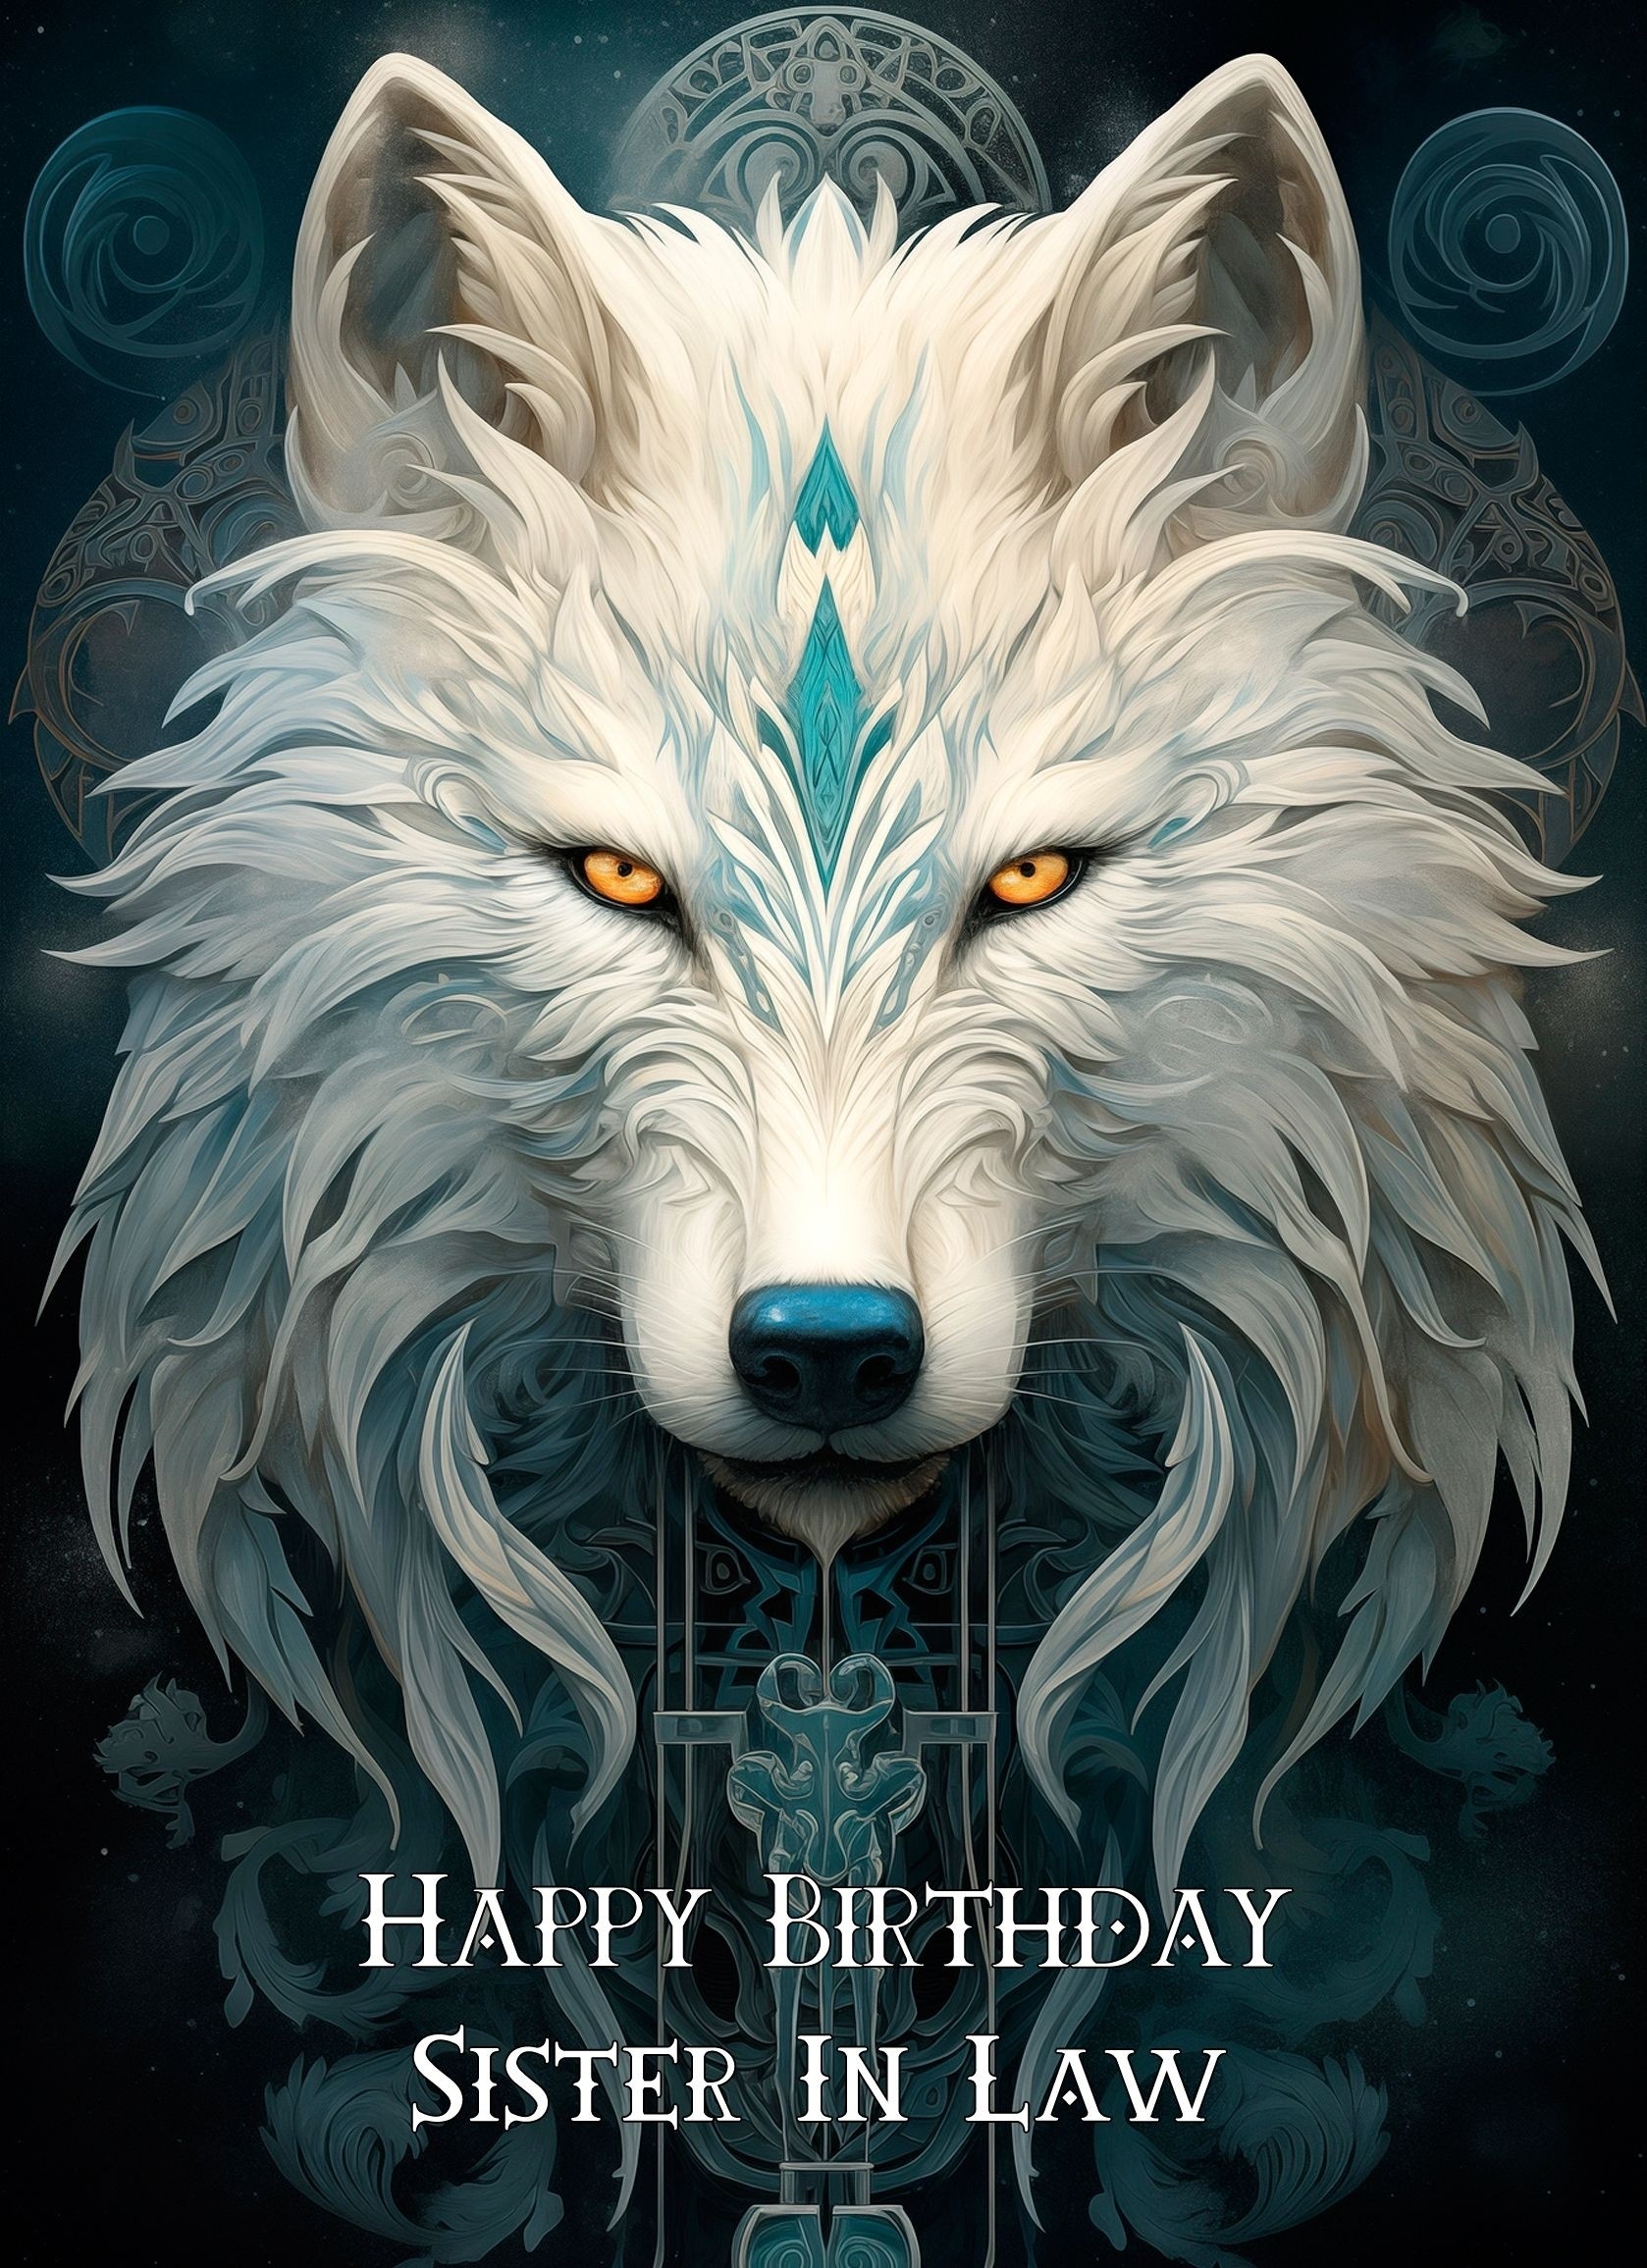 Tribal Wolf Art Birthday Card For Sister in Law (Design 1)